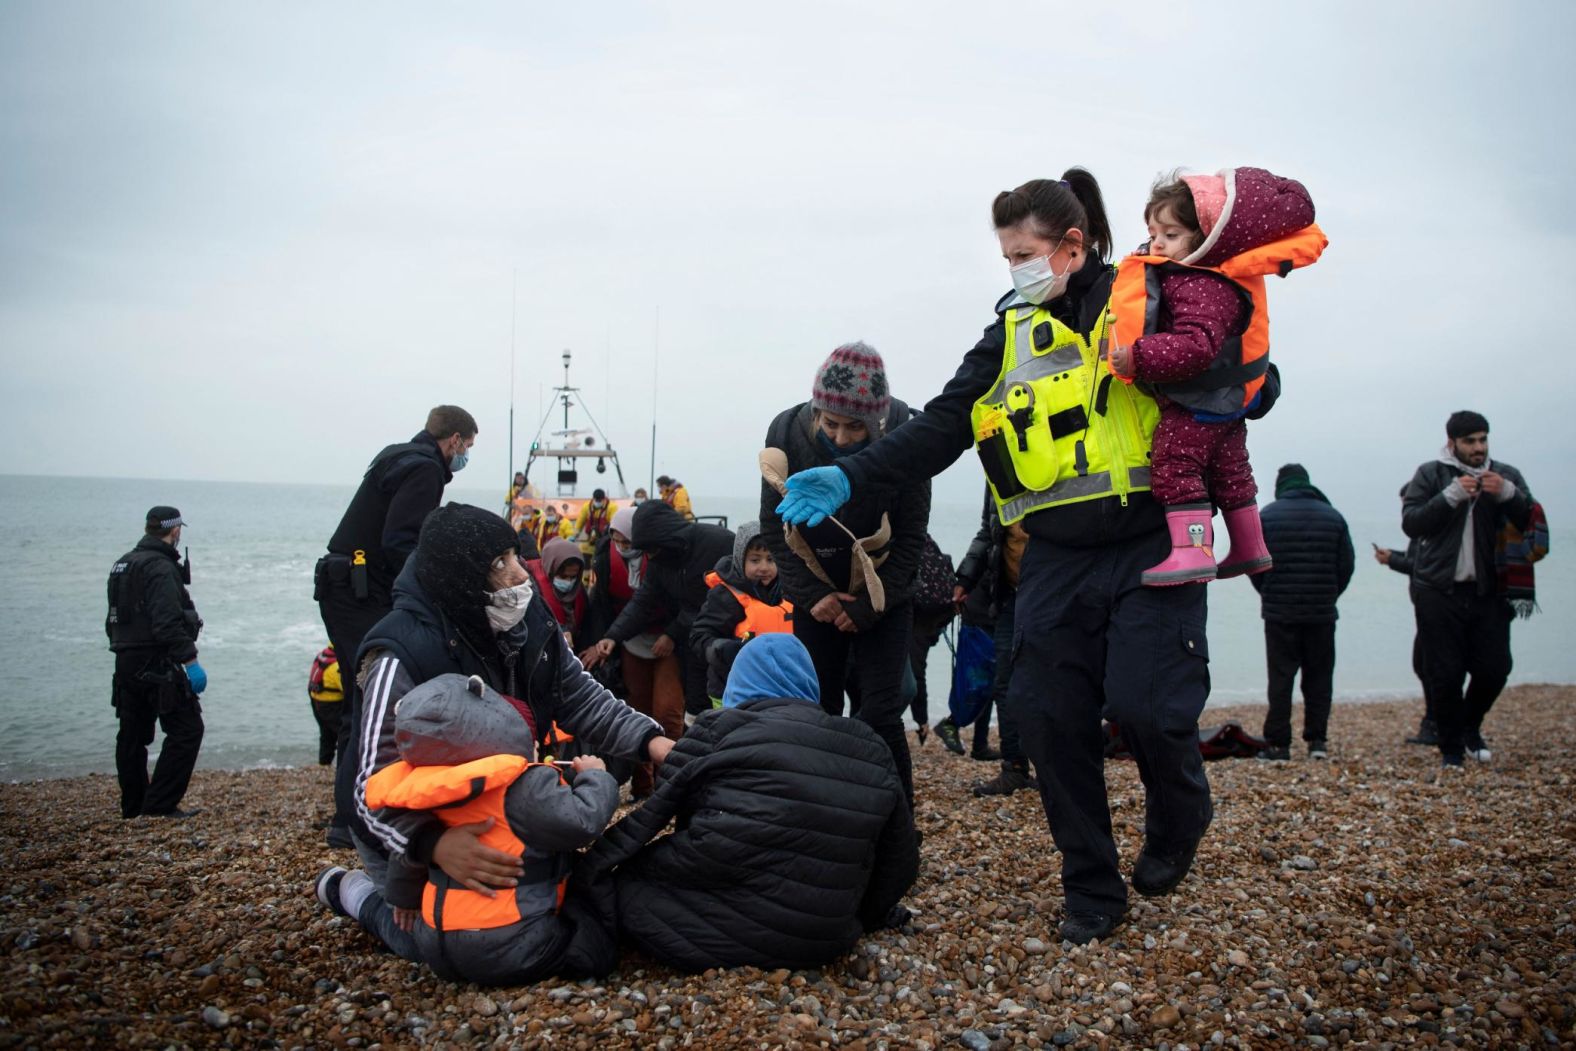 A member of the UK Border Force, right, helps young migrants on a beach in Dungeness, England, on Wednesday, November 24. The migrants had been rescued while crossing the English Channel. British and French leaders have recently <a href="https://www.cnn.com/2021/11/25/europe/uk-france-channel-crossing-deaths-intl-gbr/index.html" target="_blank">ramped up a war of words</a> over dangerous crossings of the English Channel, which have increased dramatically this year.